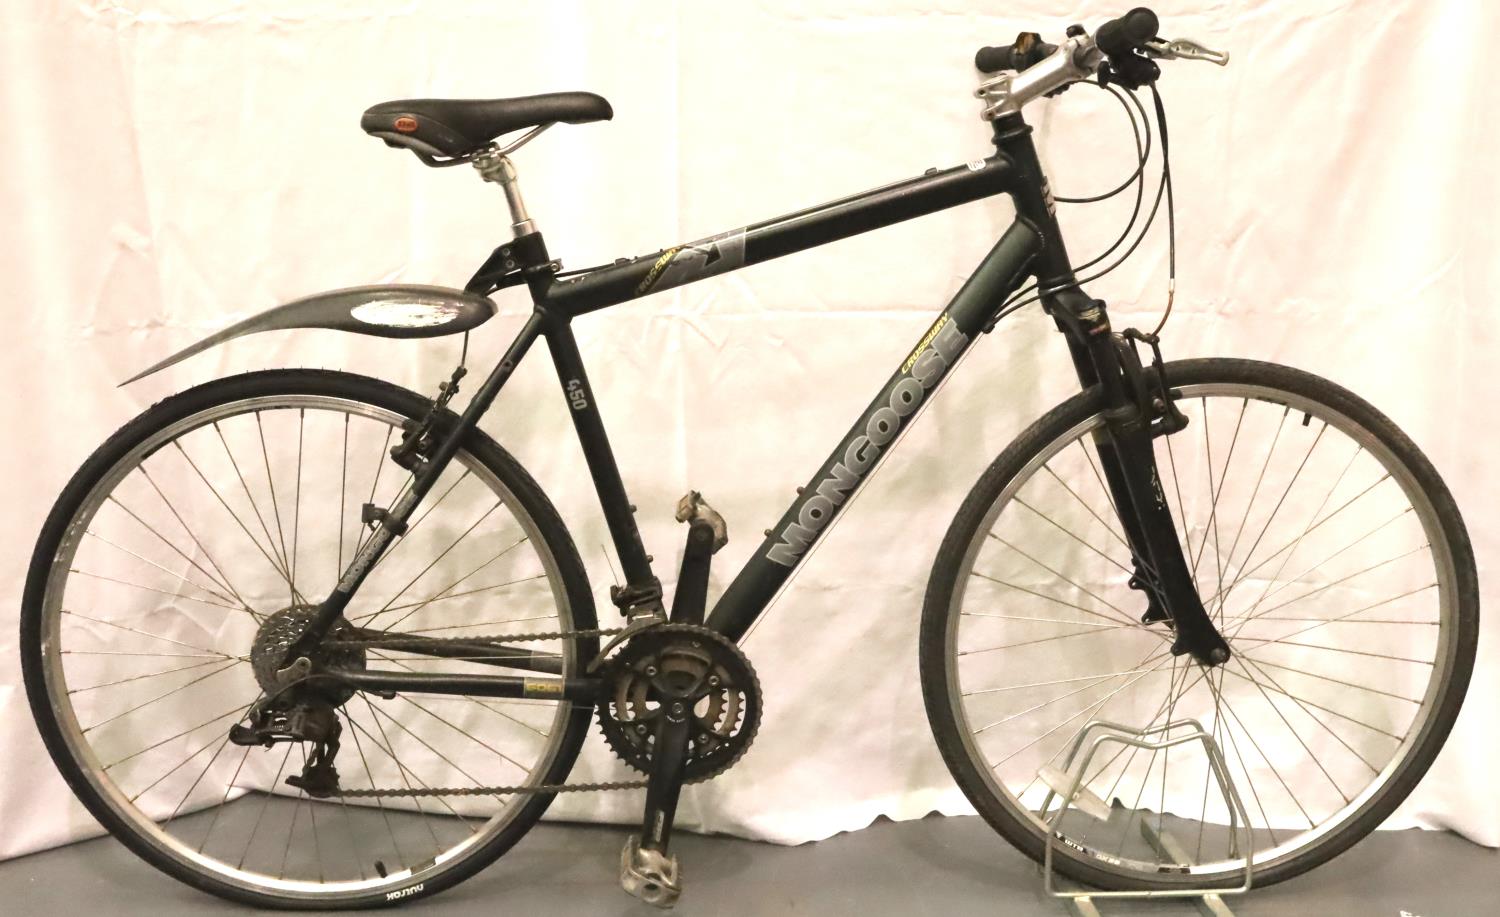 Gents Crossway Mongoose bike 22 inch, frame, 24 gears. Not available for in-house P&P, contact